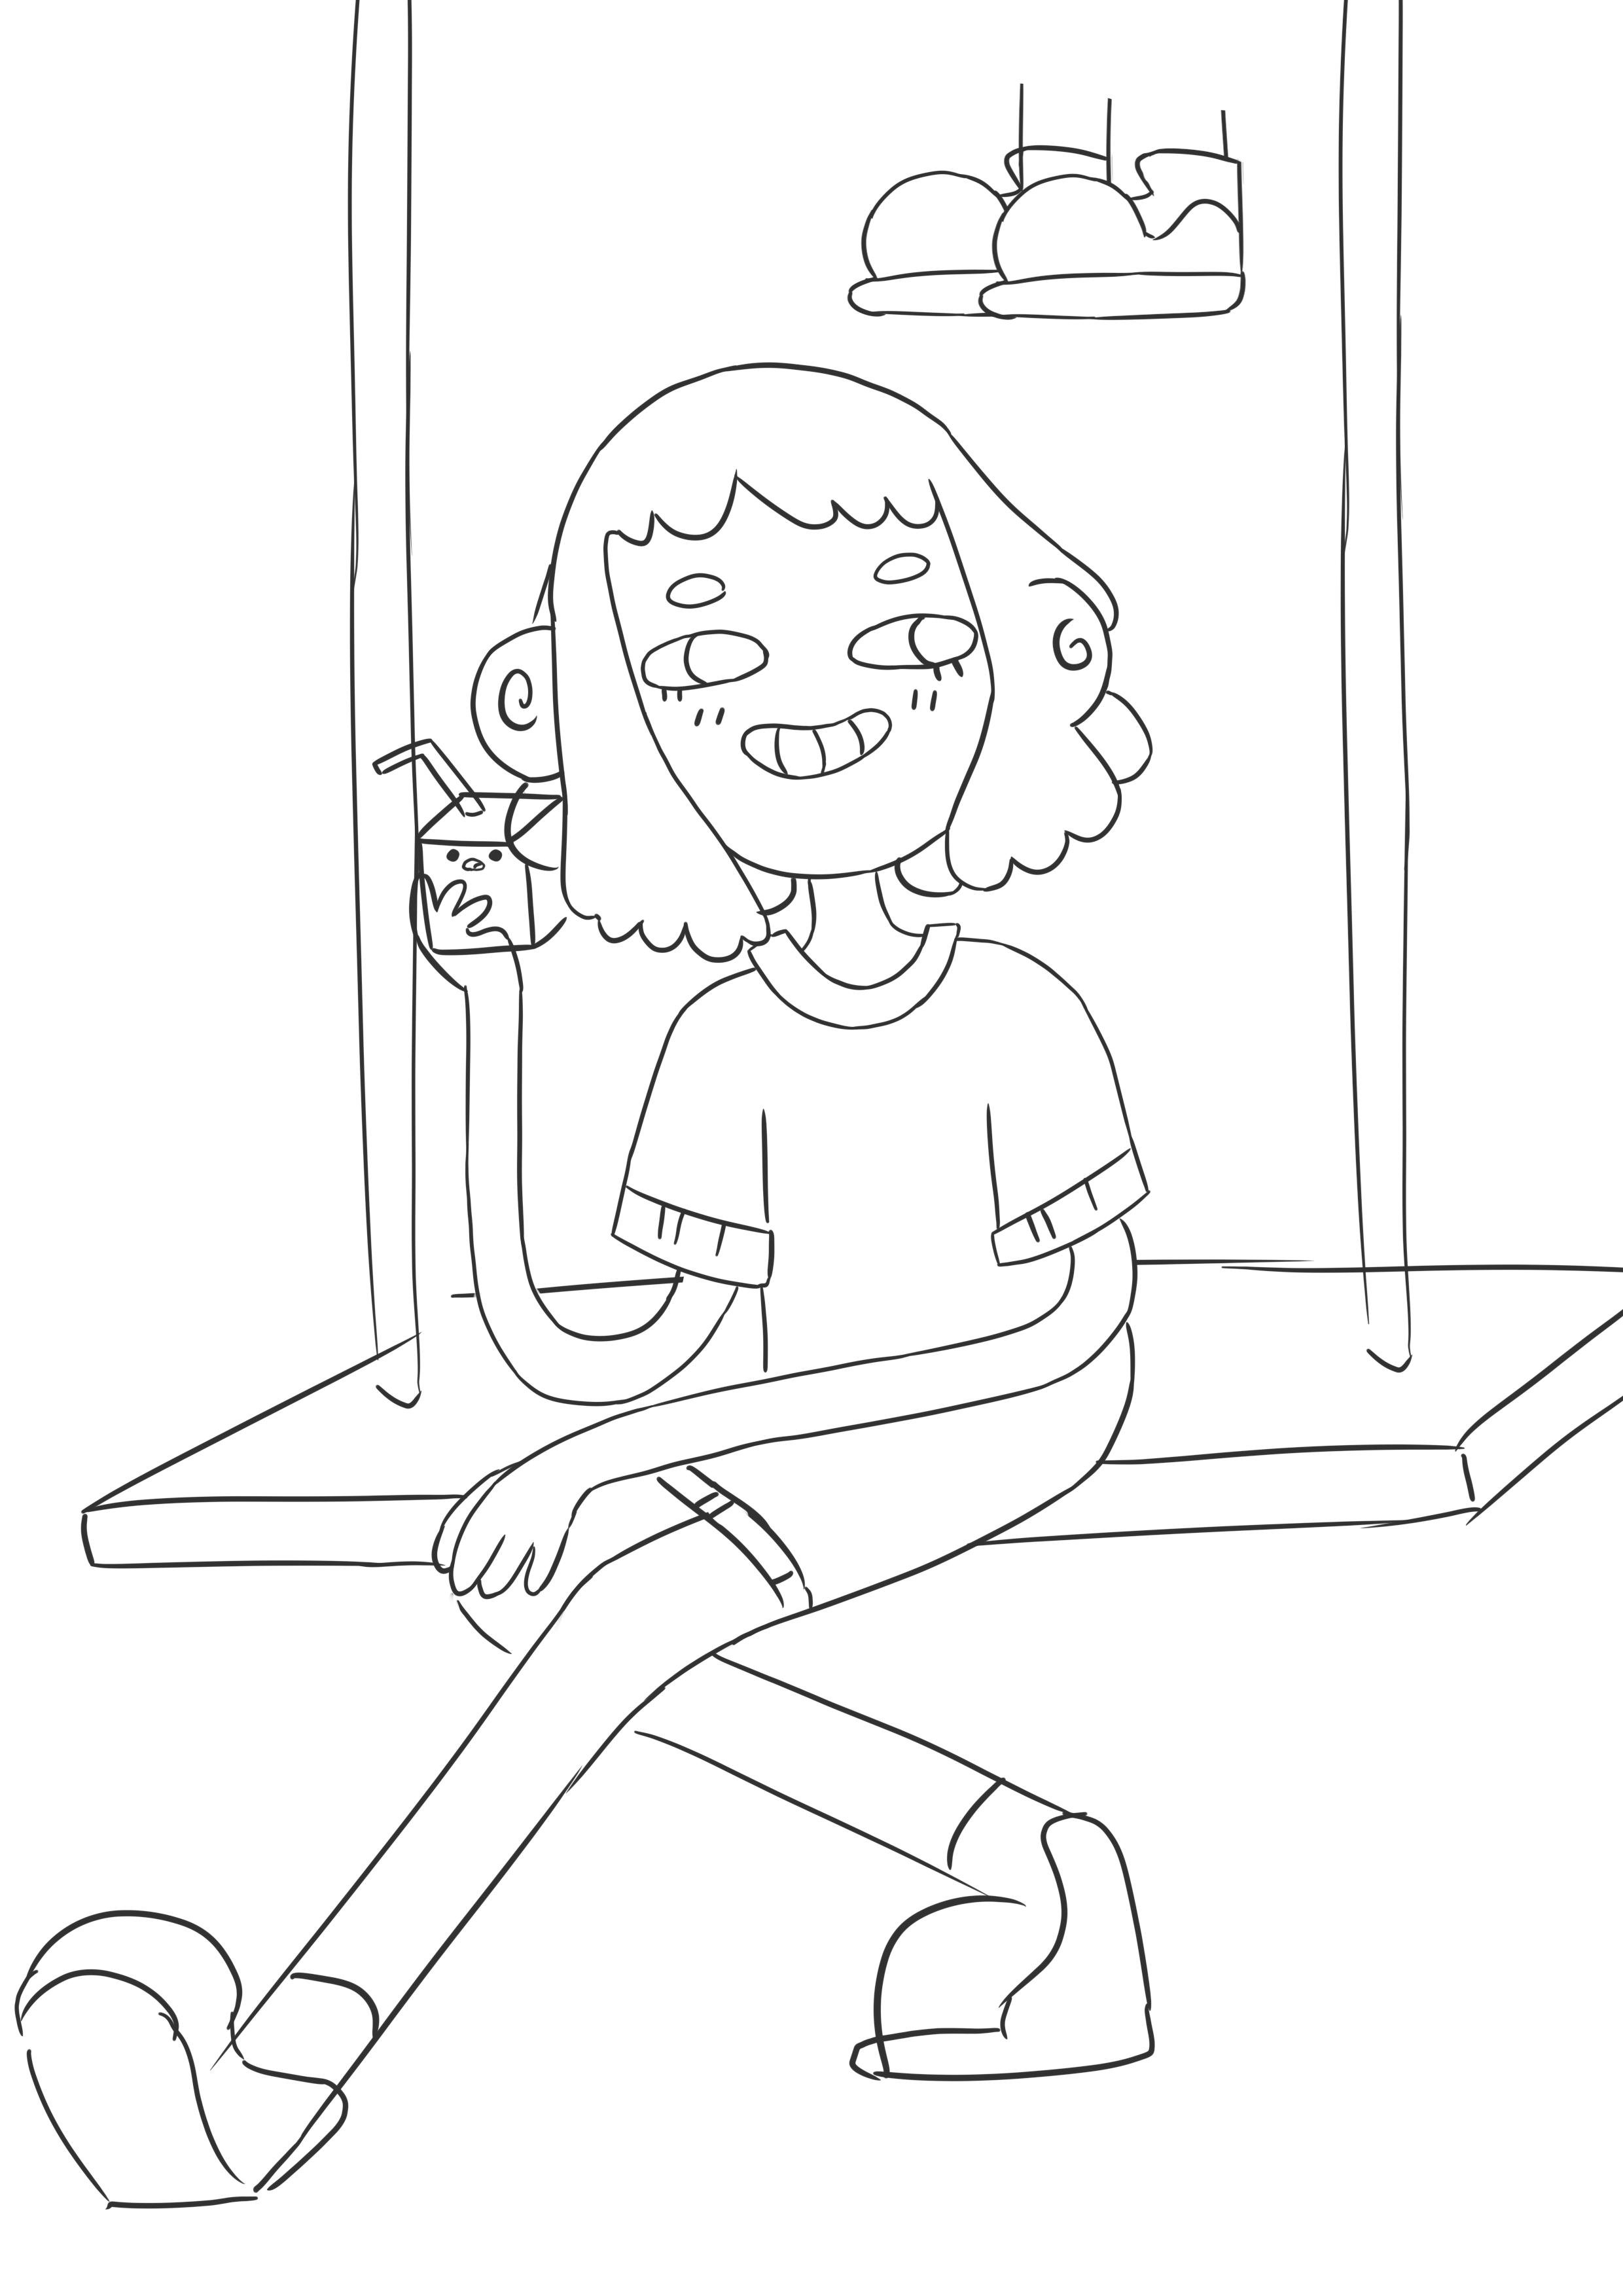 This is Angie, playing on a swing and having fun